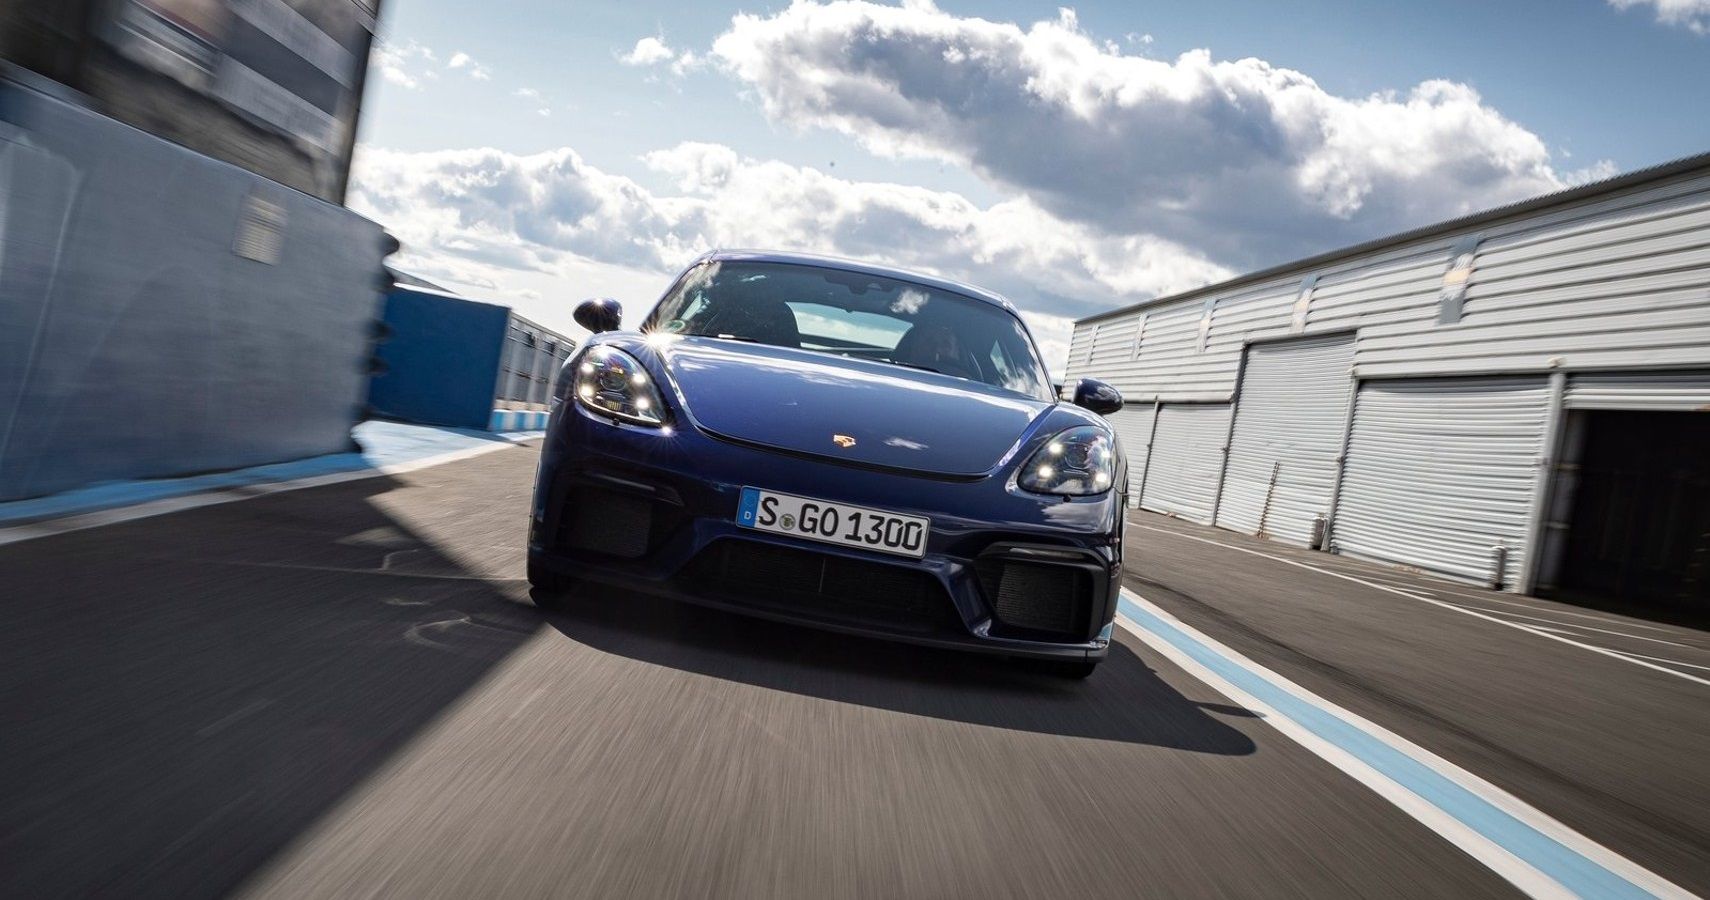 10 Reasons Why The Porsche Cayman Gt4 Is One Of The Best Sports Cars On The Market